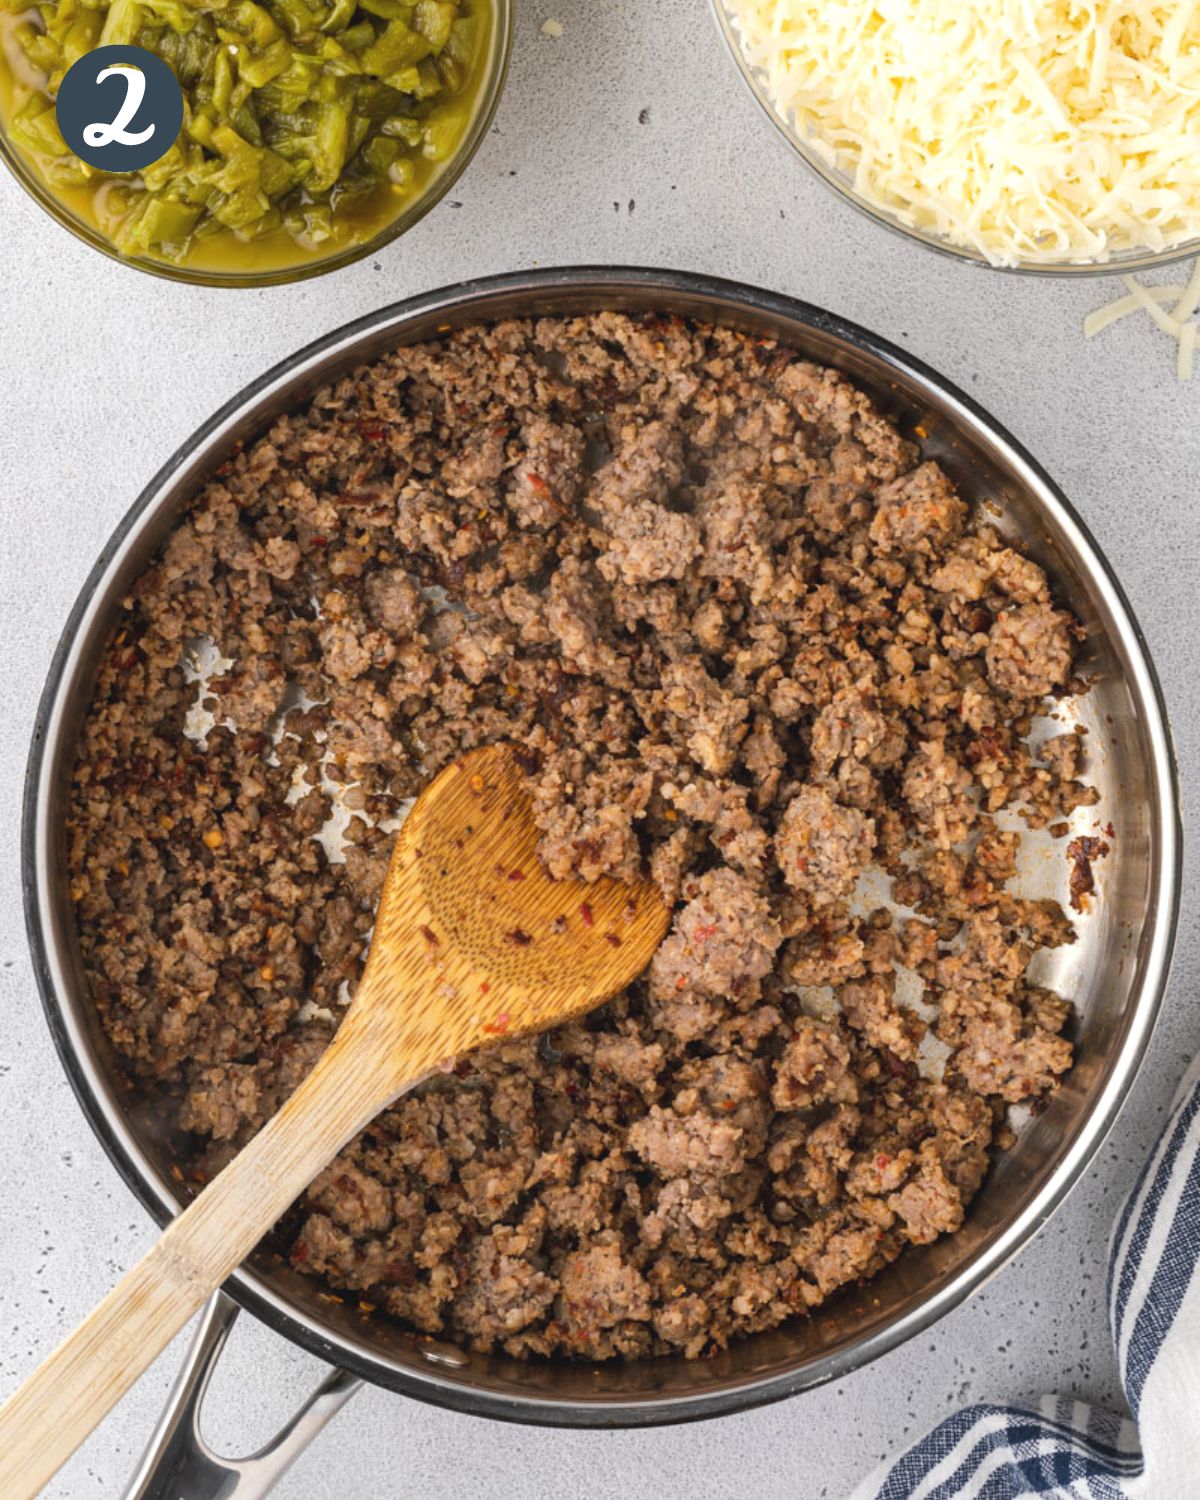 Ground sausage in a pan with a wooden spoon, and green chiles and cheese above.